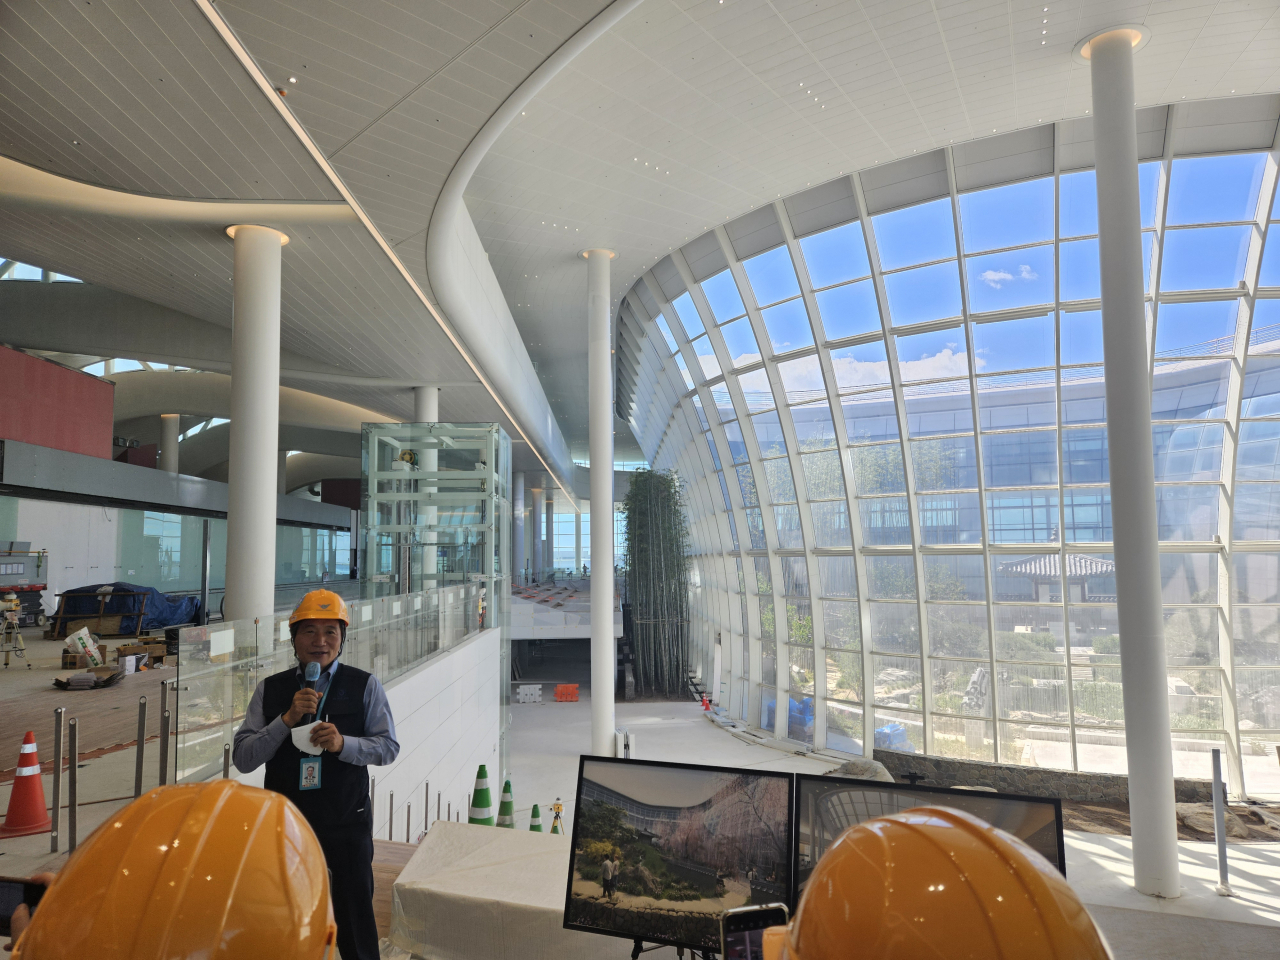 Lee Hag-jae, president and CEO of Incheon International Airport Corporation, introduces the fourth-phase expansion project at the airport's Terminal 2 construction site in Incheon on Tuesday. (Kim Hae-yeon/ The Korea Herald)